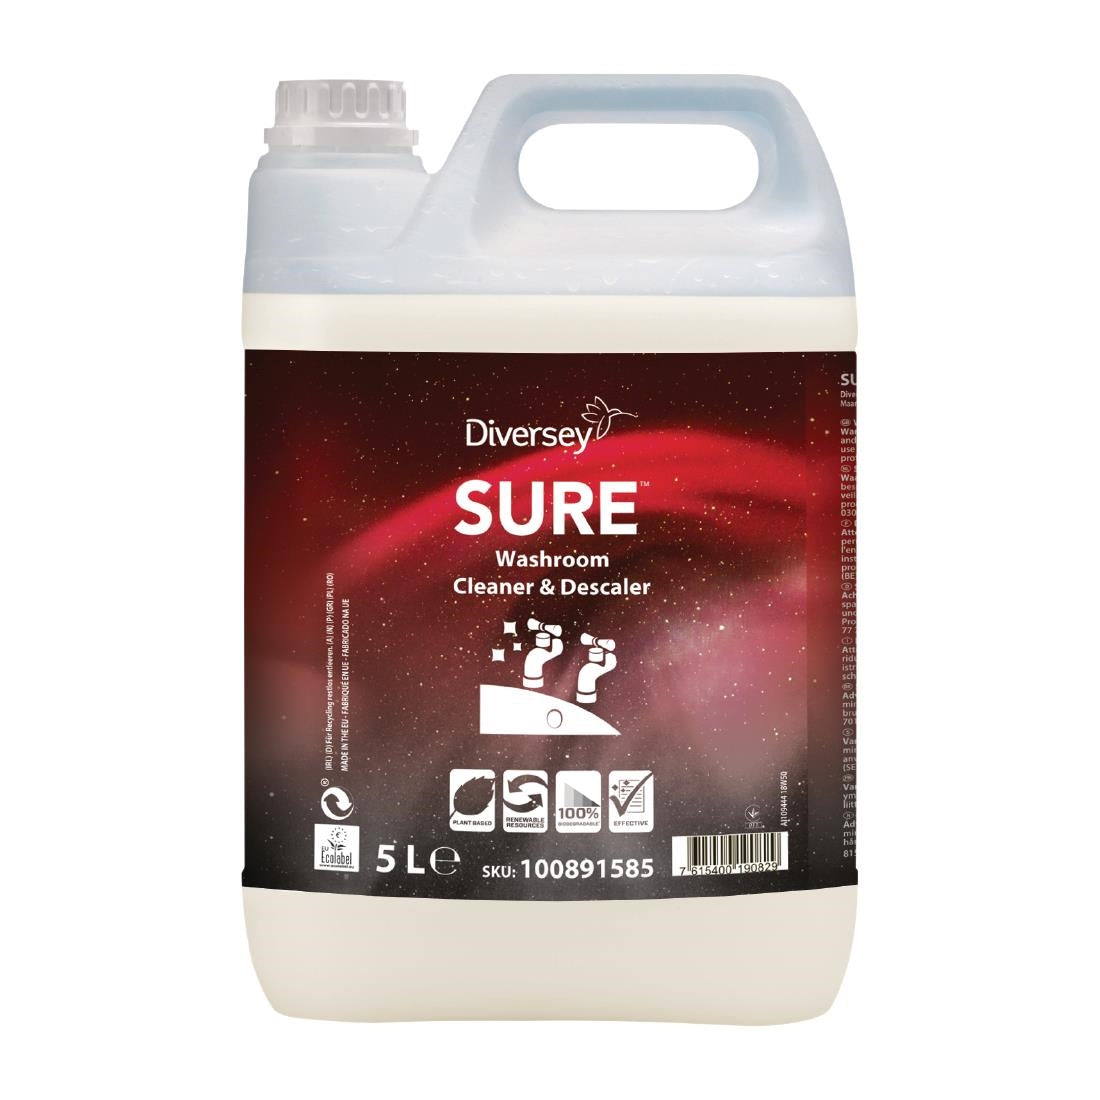 CX824 SURE Washroom Cleaner and Descaler Concentrate 5Ltr JD Catering Equipment Solutions Ltd